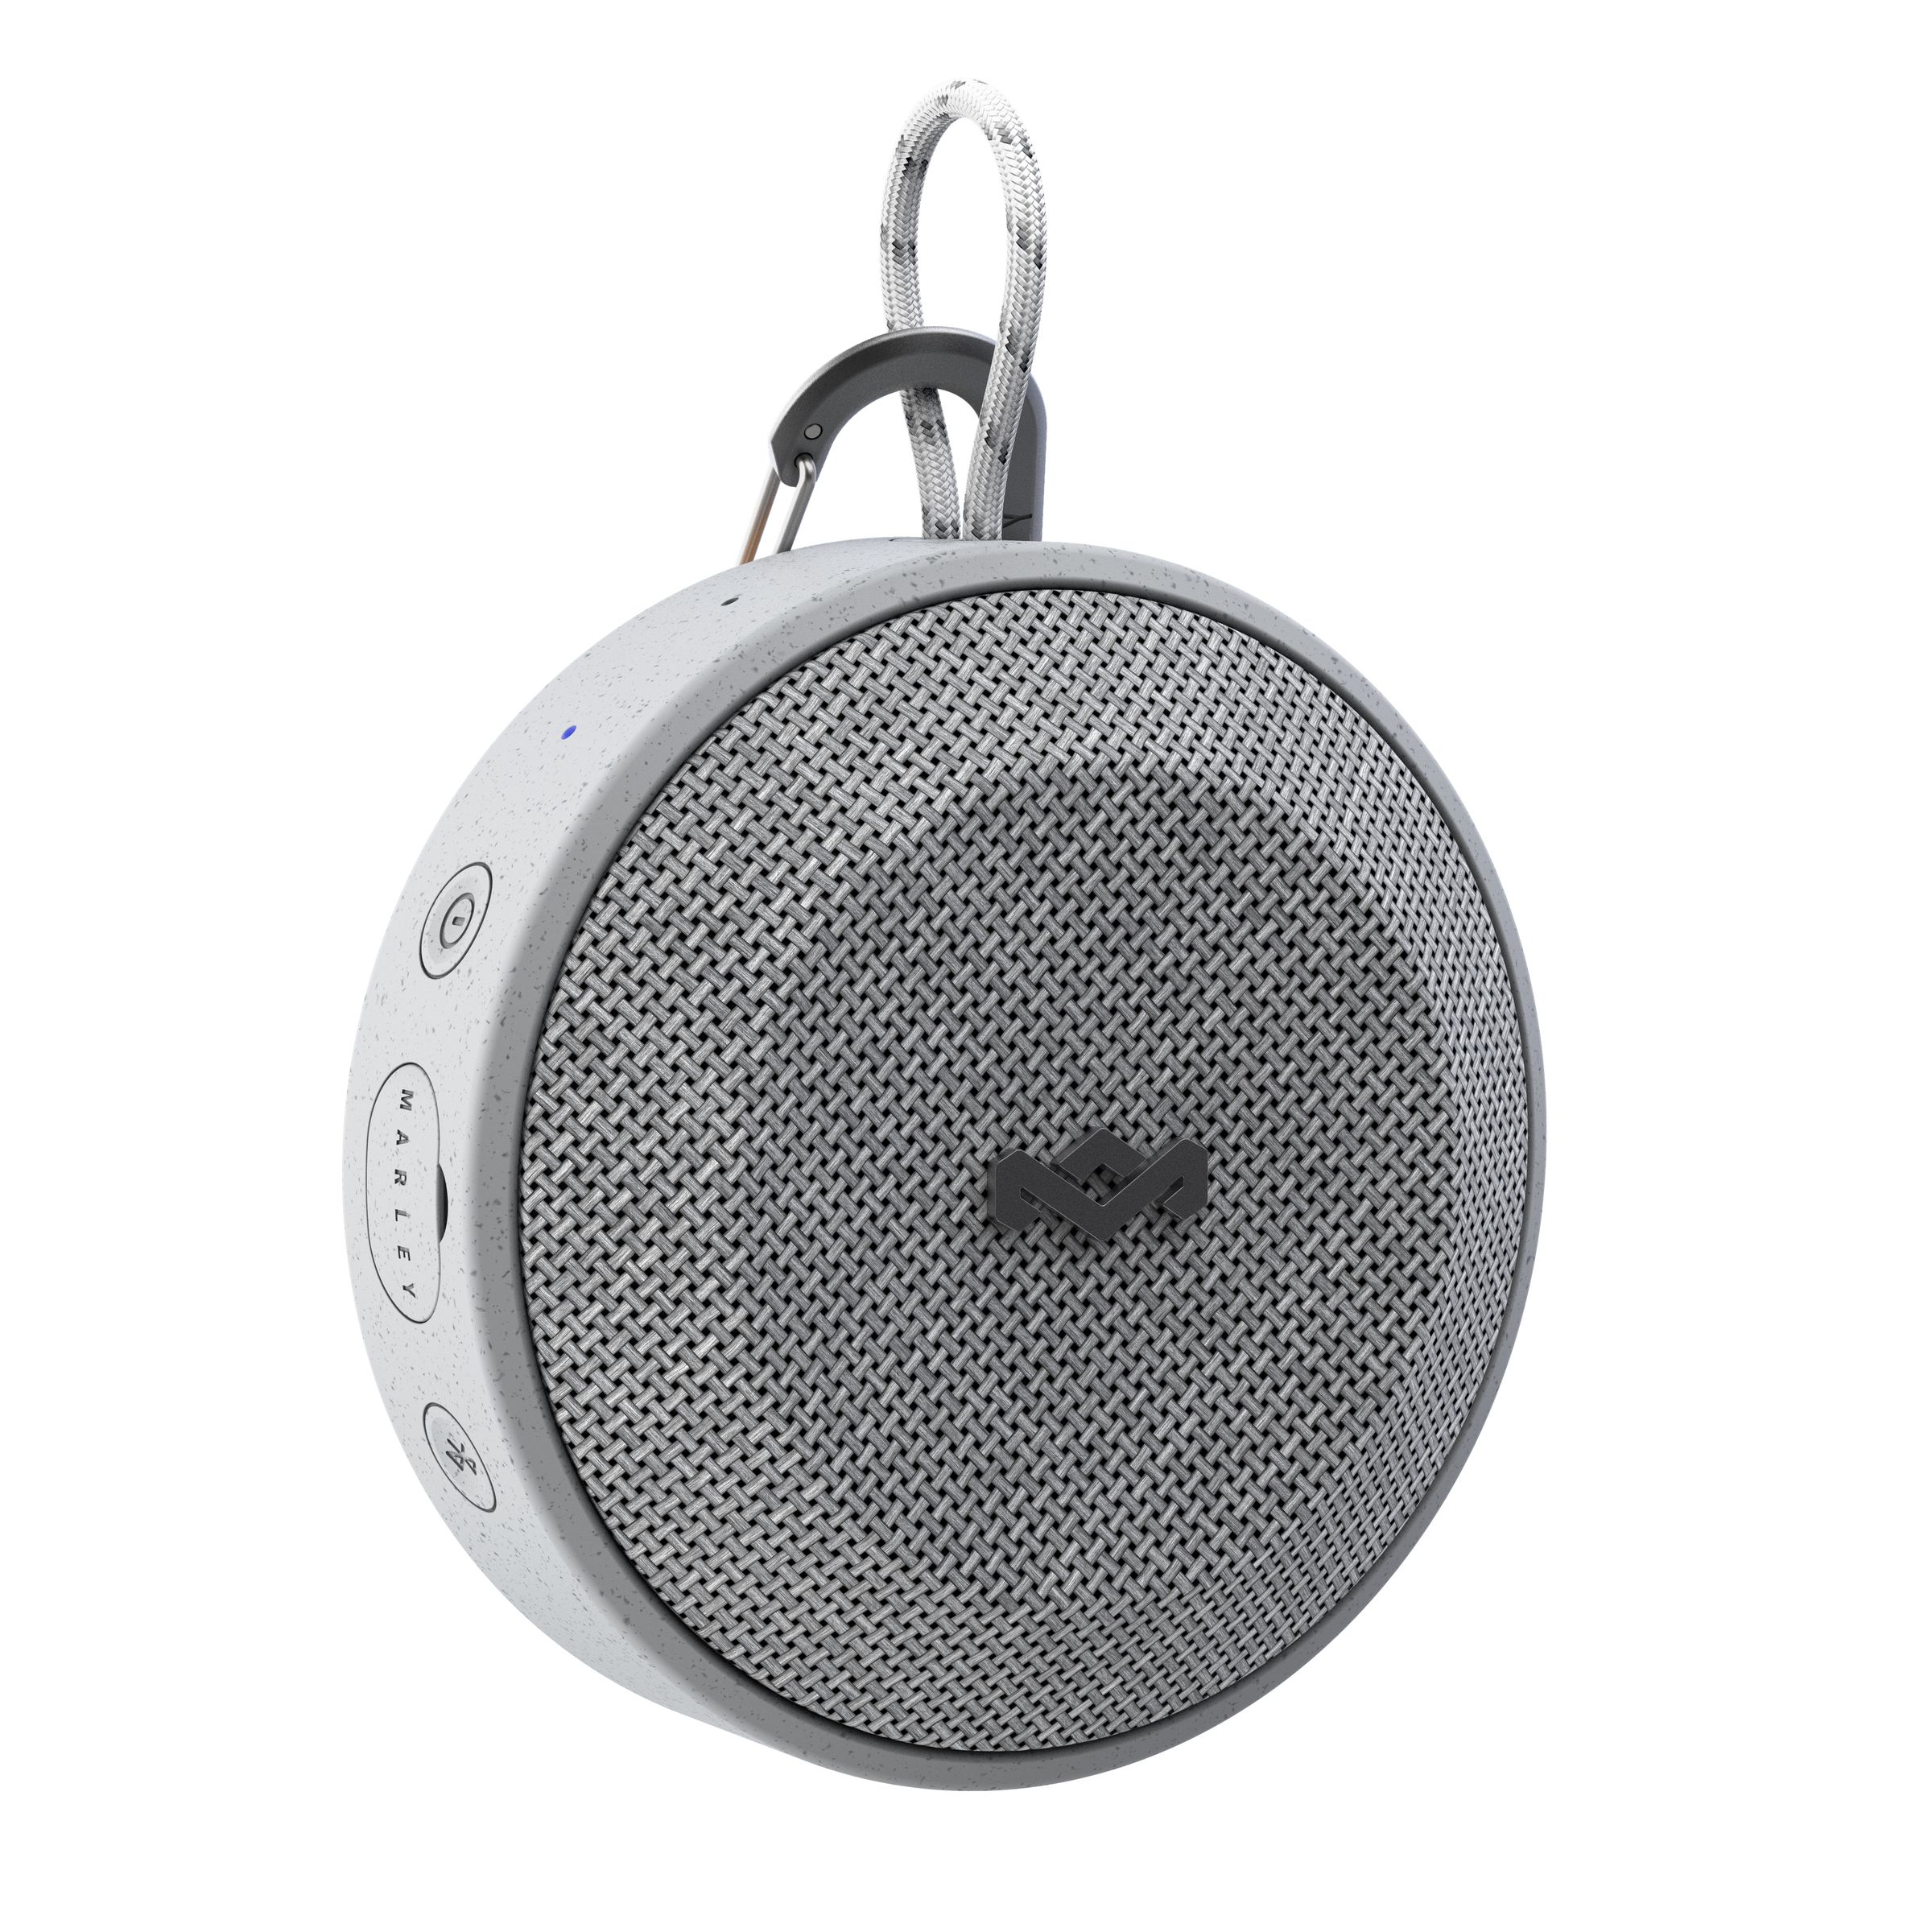 House of Marley’s No Bounds speaker in gray.